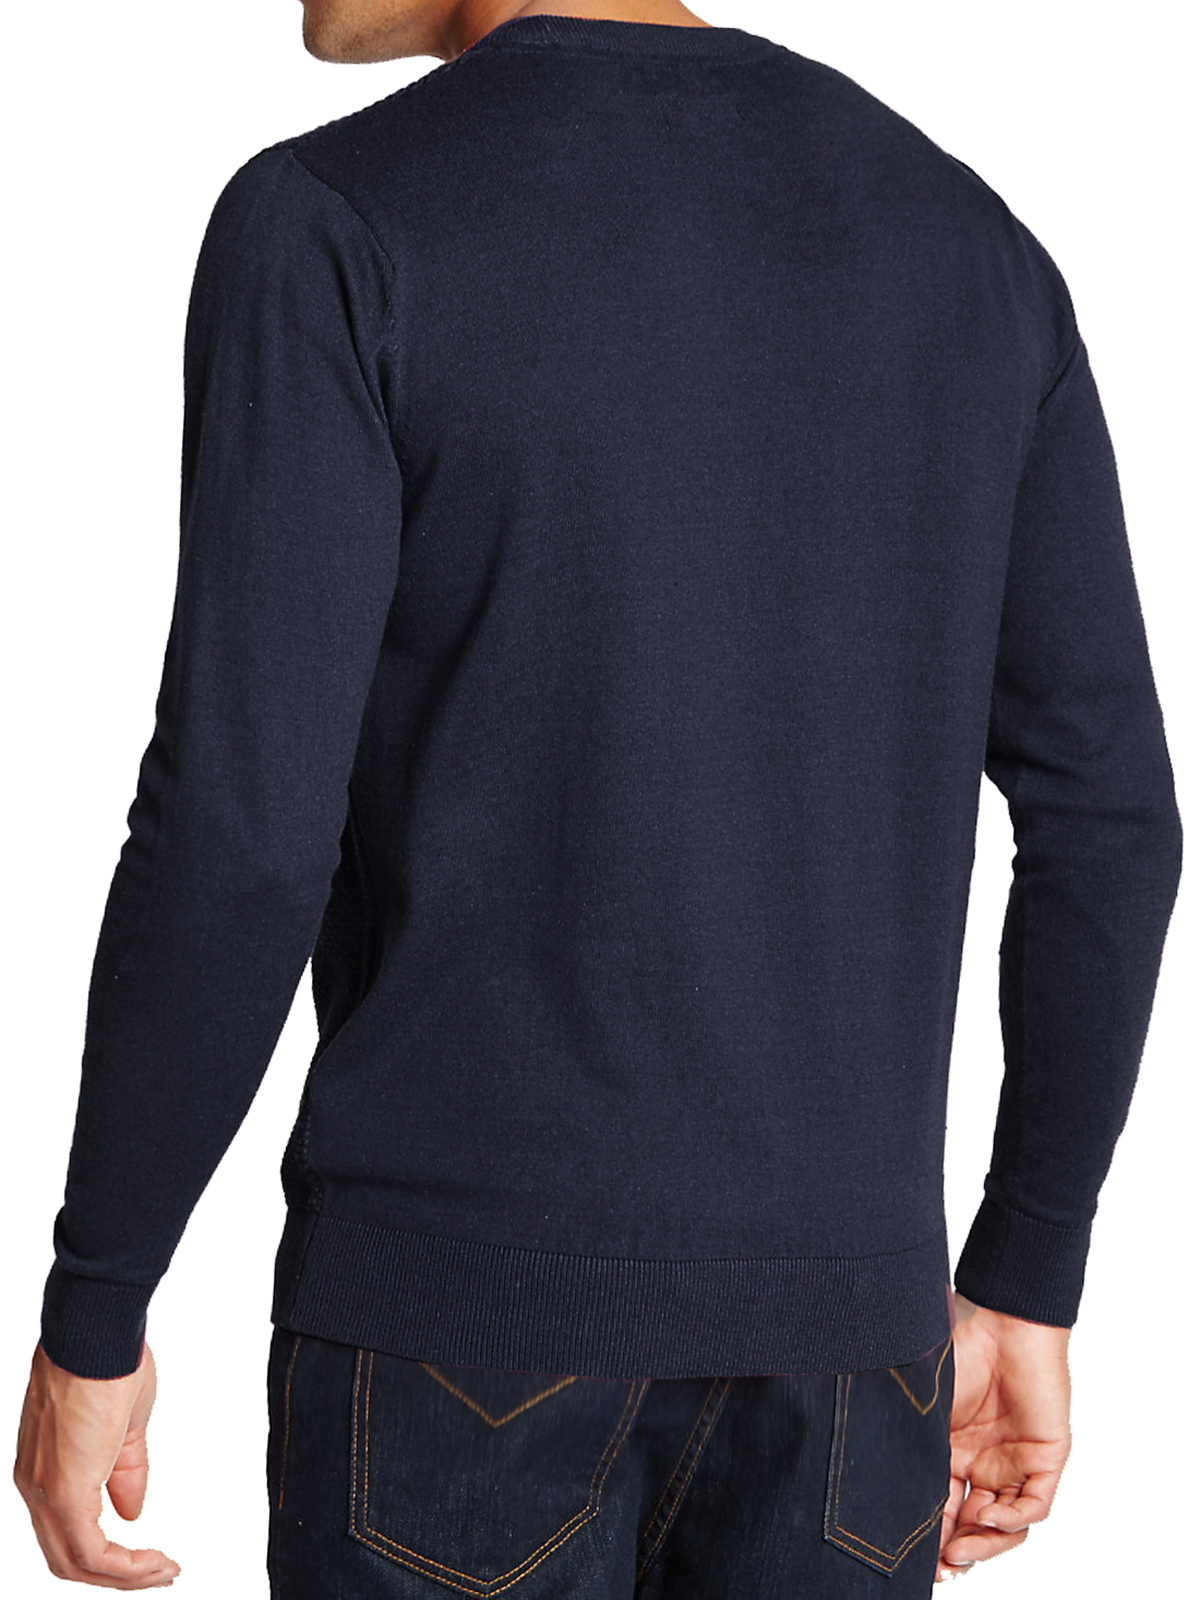 Marks and Spencer - - M&5 NAVY Cotton Blend Textured Jumper - Size ...